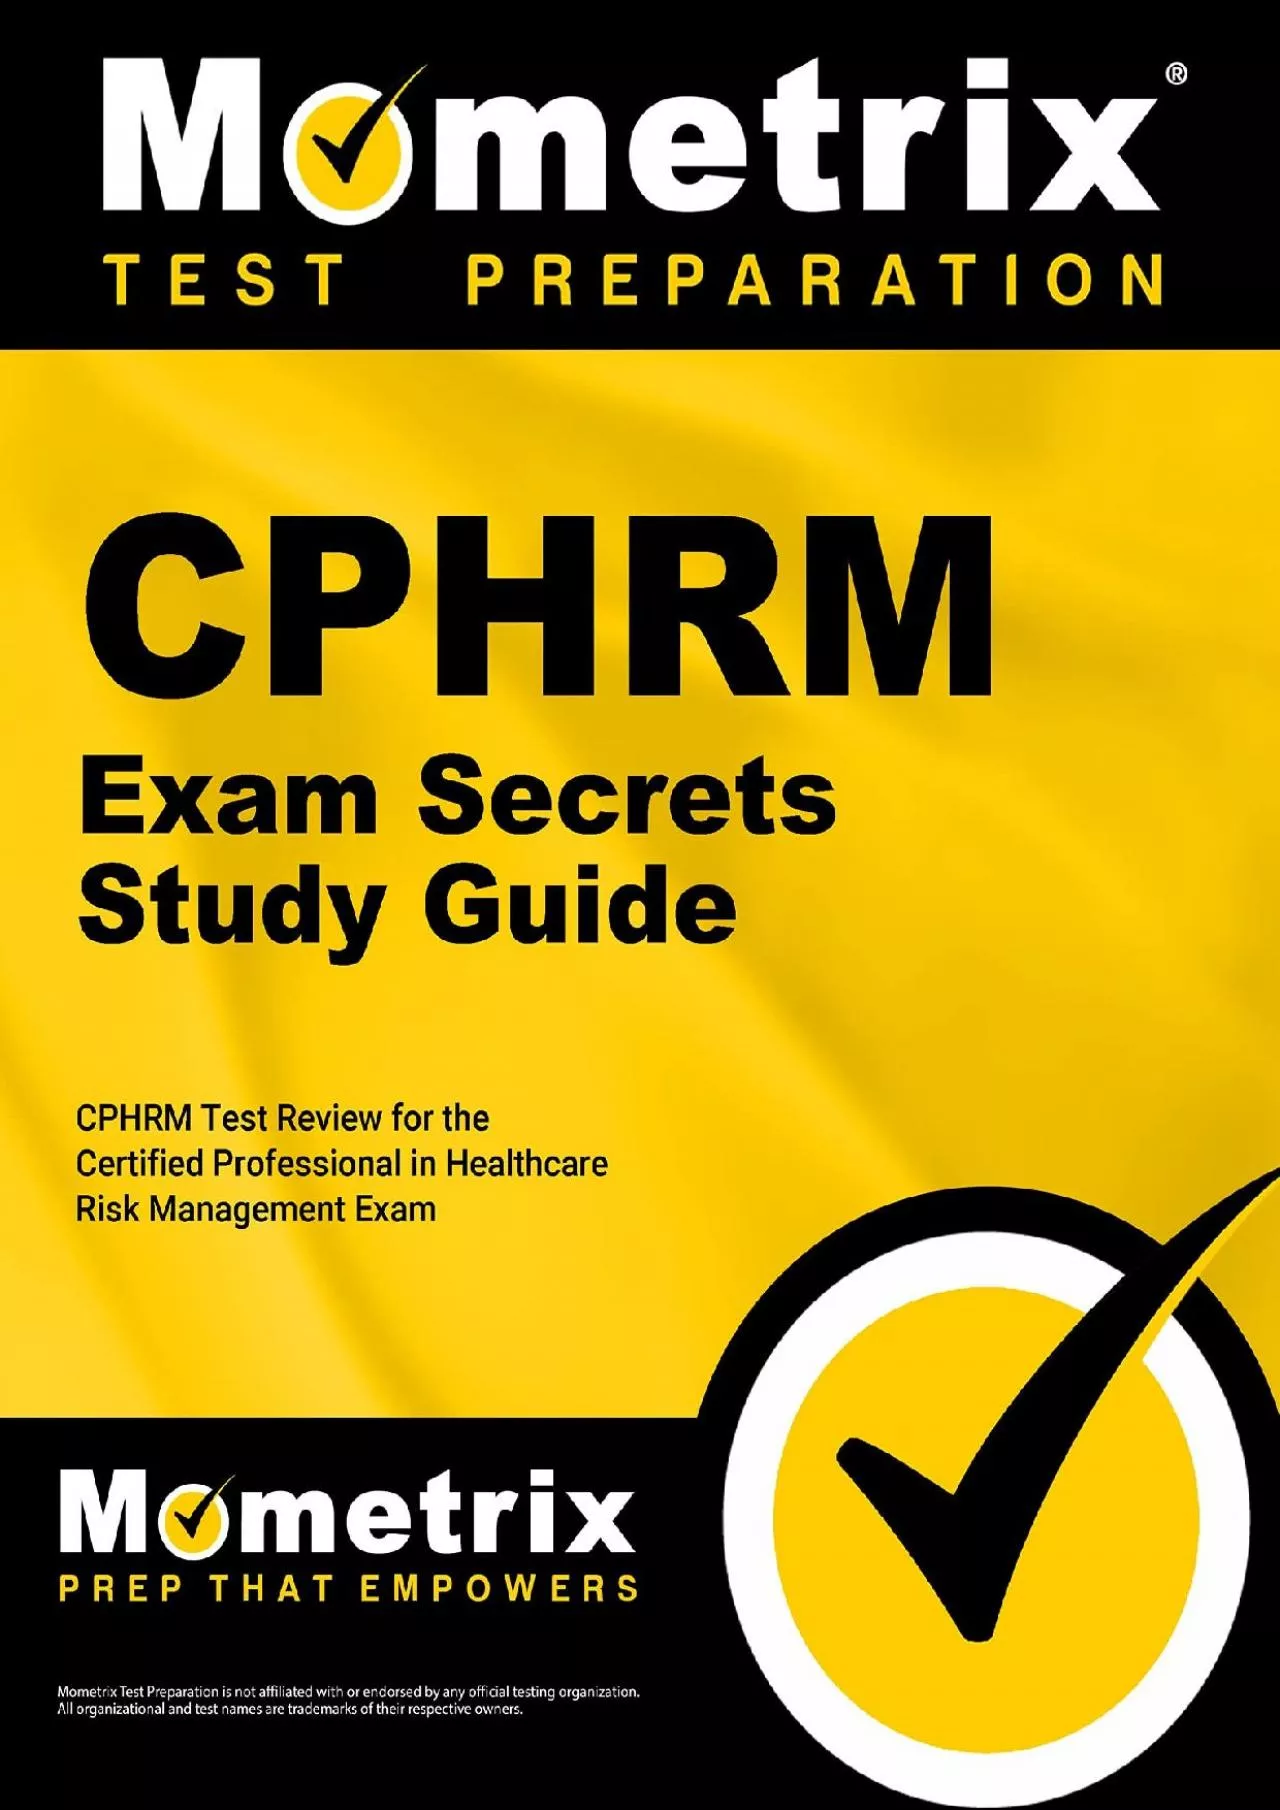 [READ] CPHRM Exam Secrets Study Guide: CPHRM Test Review for the Certified Professional